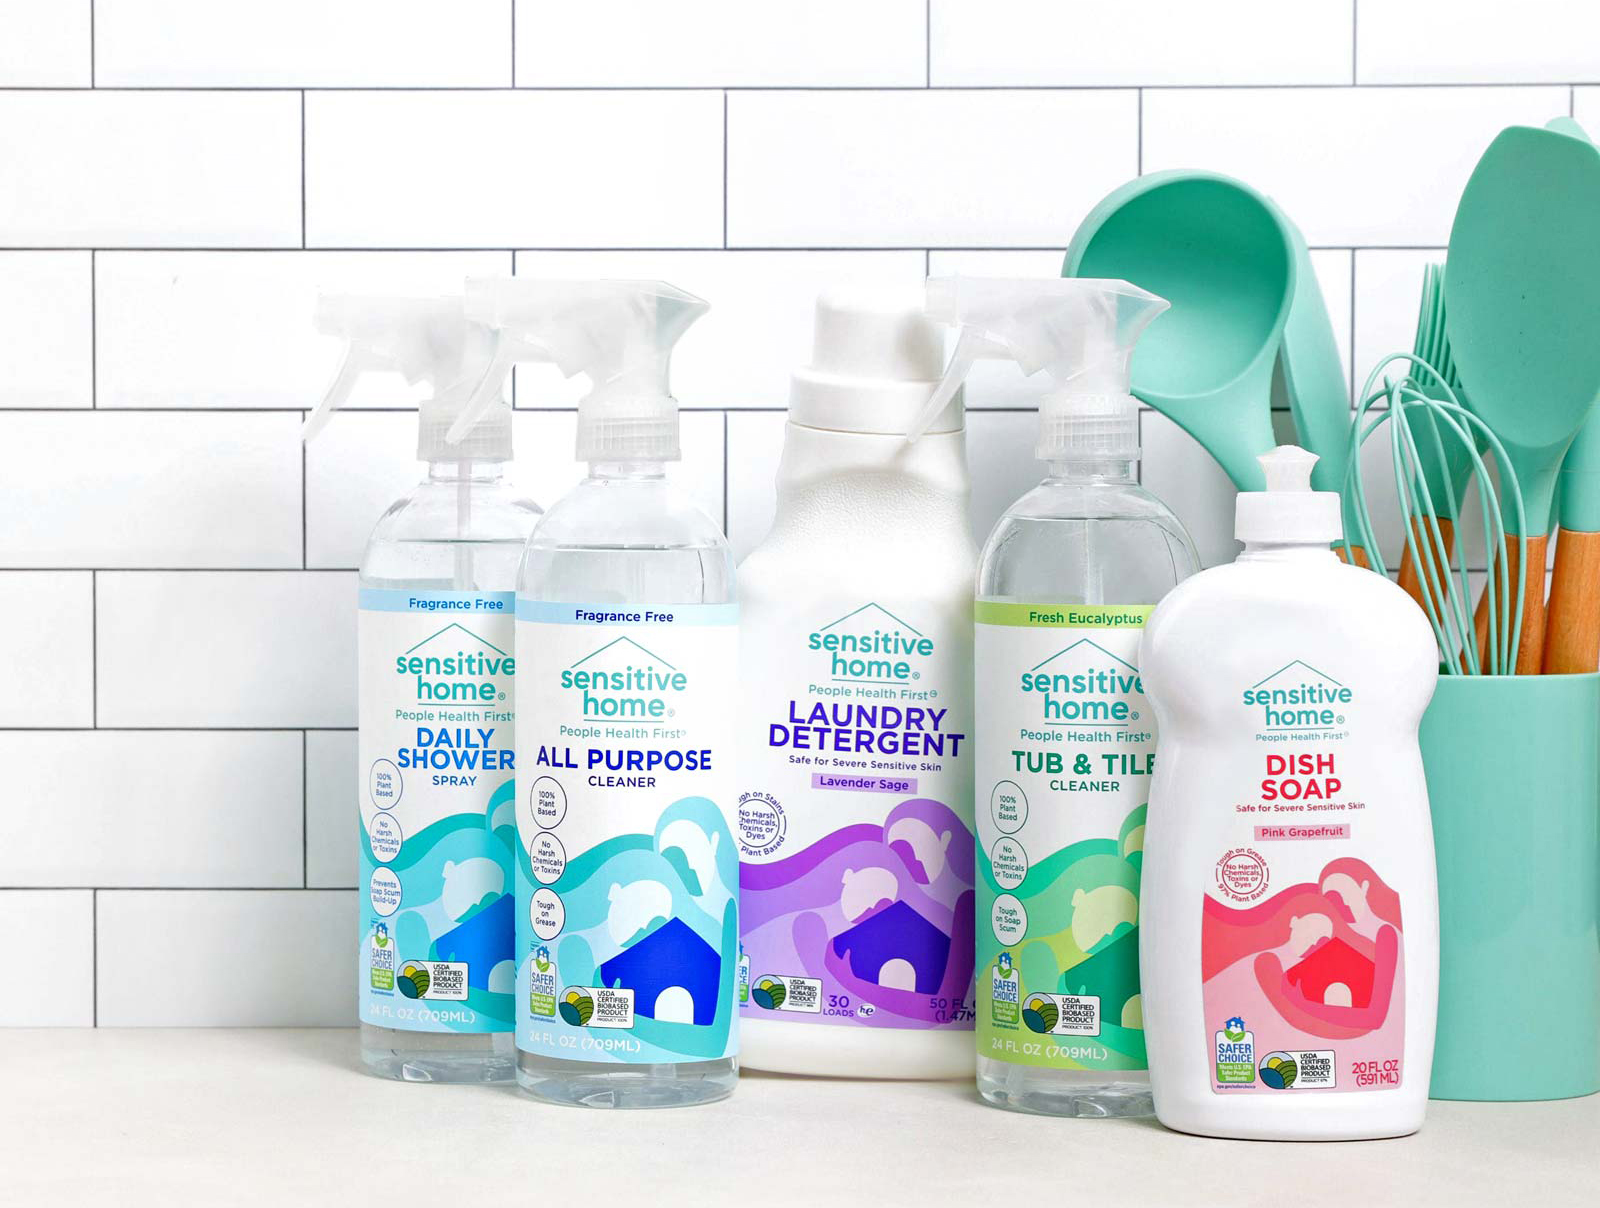 A small lineup of Sensitive Home products featuring spray bottle cleaners, dish soap, and laundry detergent photographed on a kitchen counter with white subway tile walls and kitchen utensils in the background.